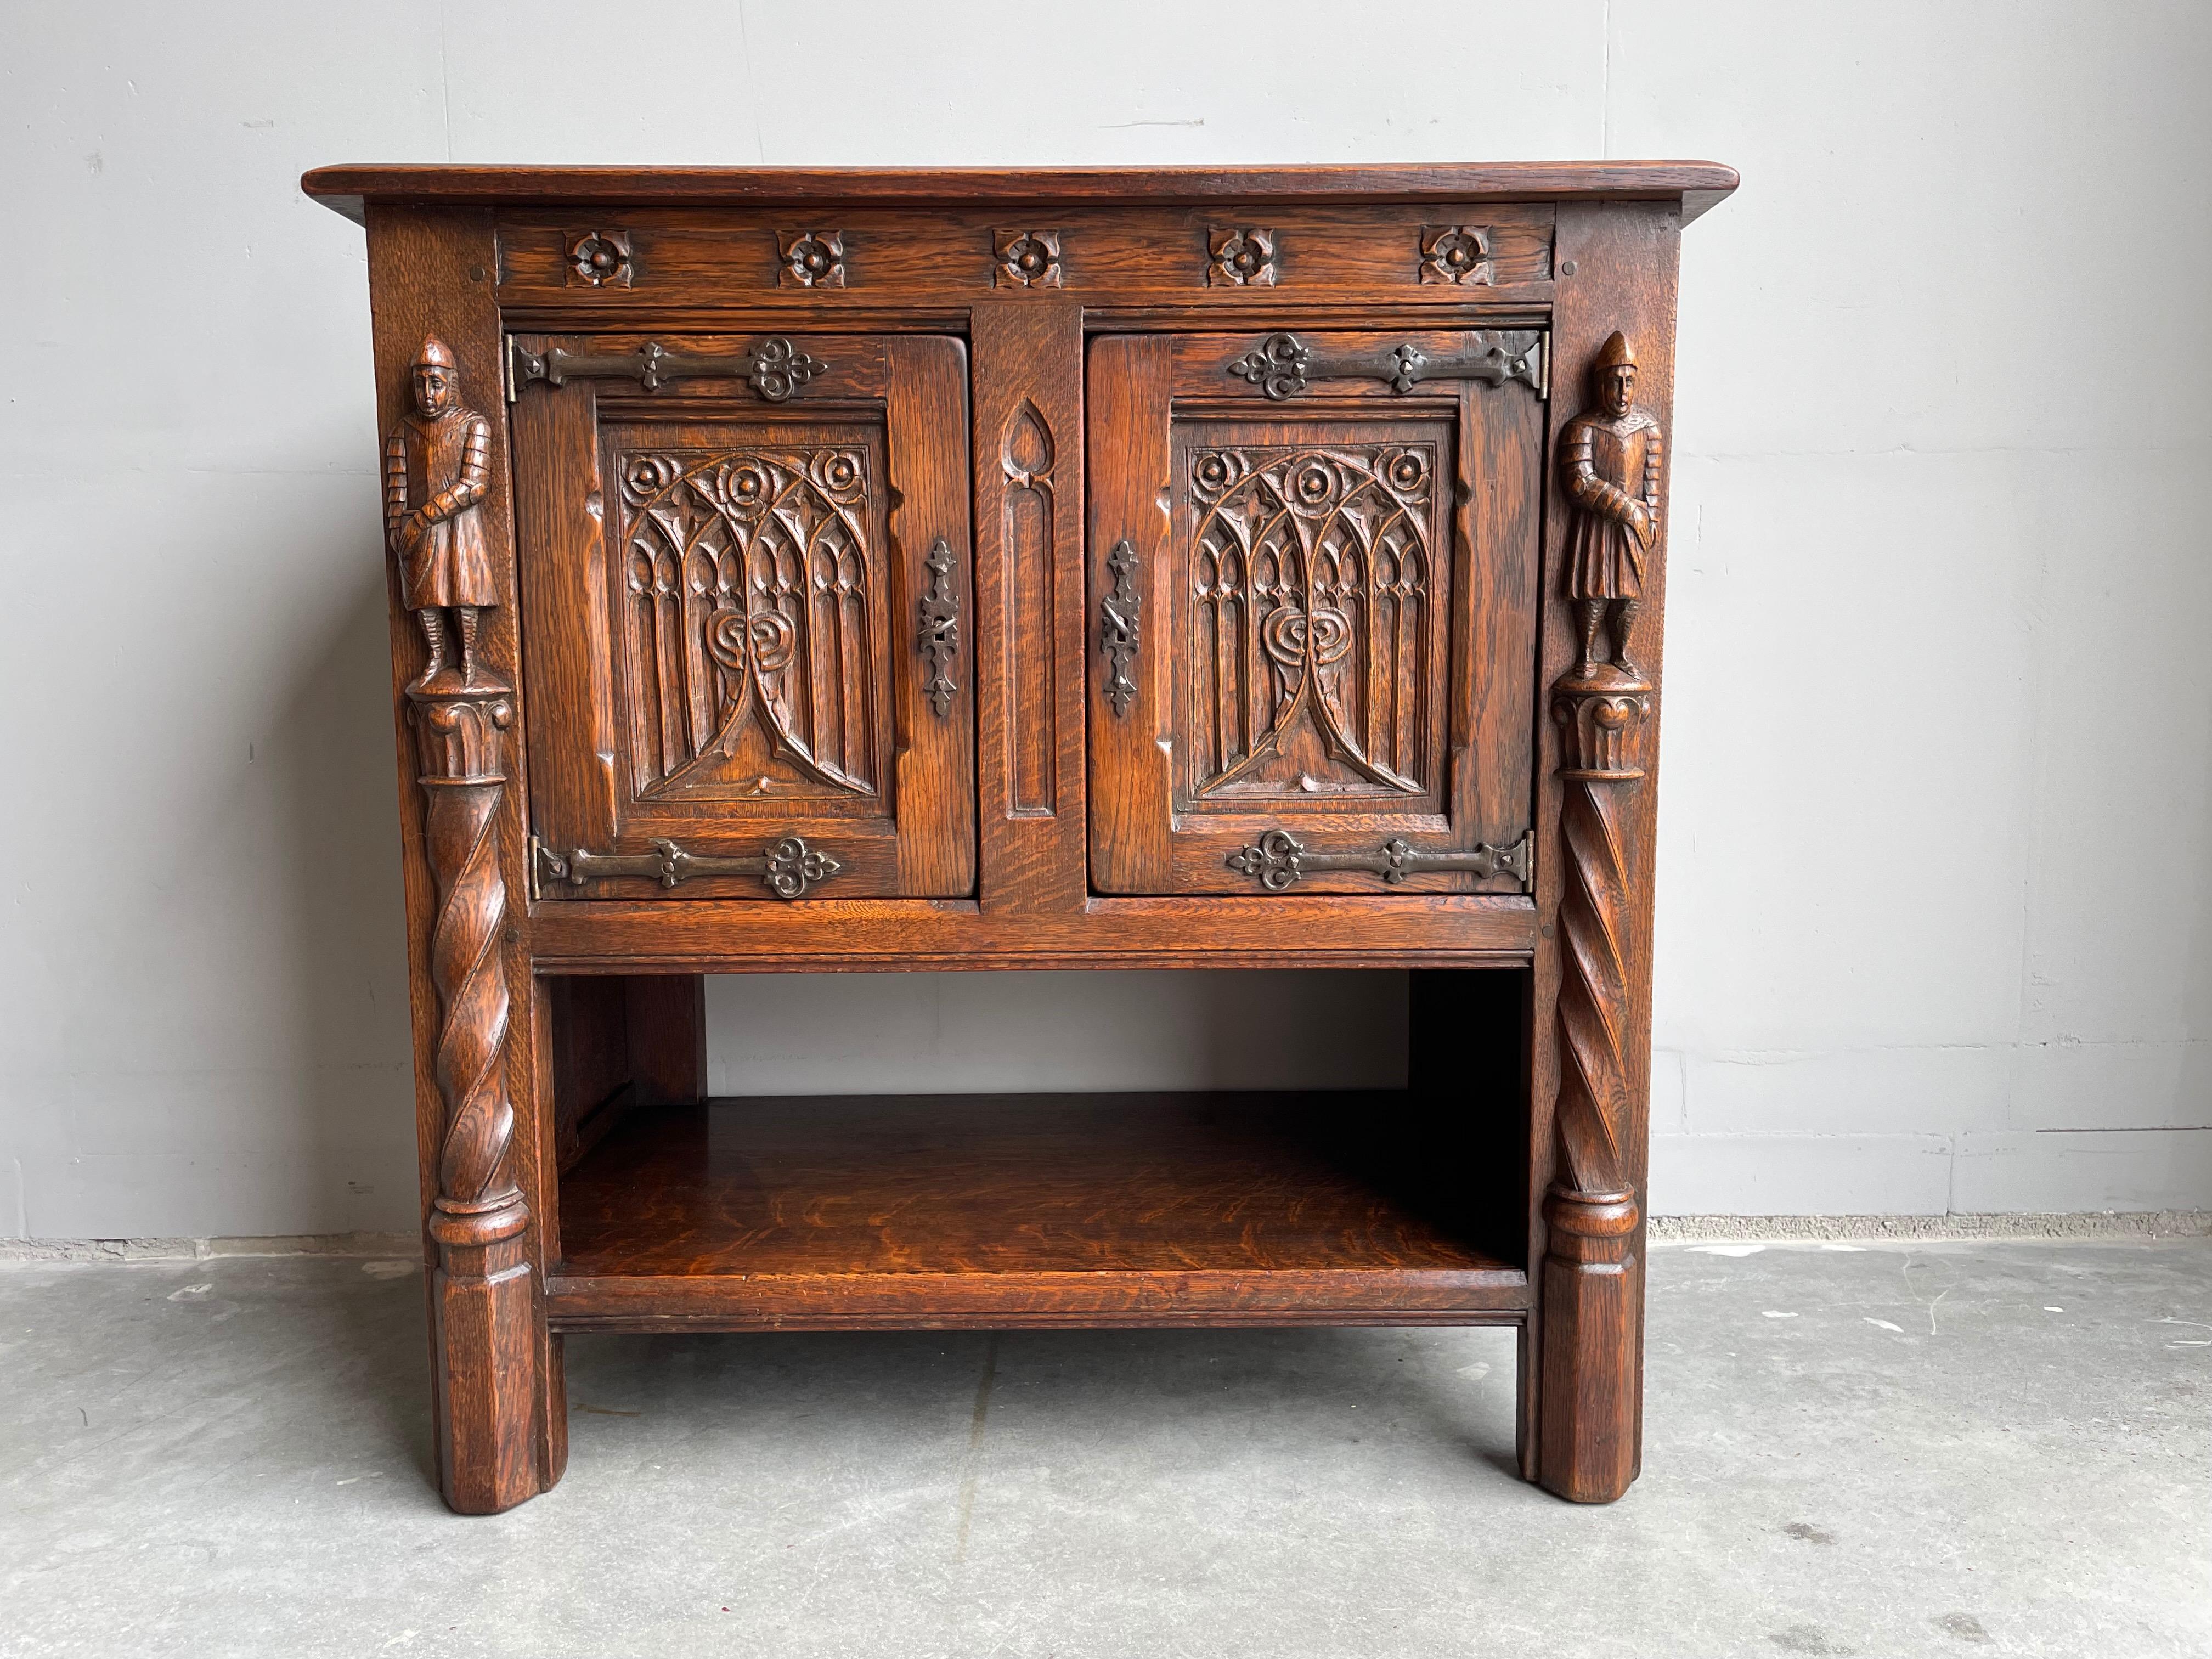 Marvelous and practical Gothic Revival cabinet with Medieval knight sculptures and great patina.

This rare, Dutch workmanship Gothic dry bar truly is in excellent condition. This beautifully hand carved cabinet comes with two knights who are like